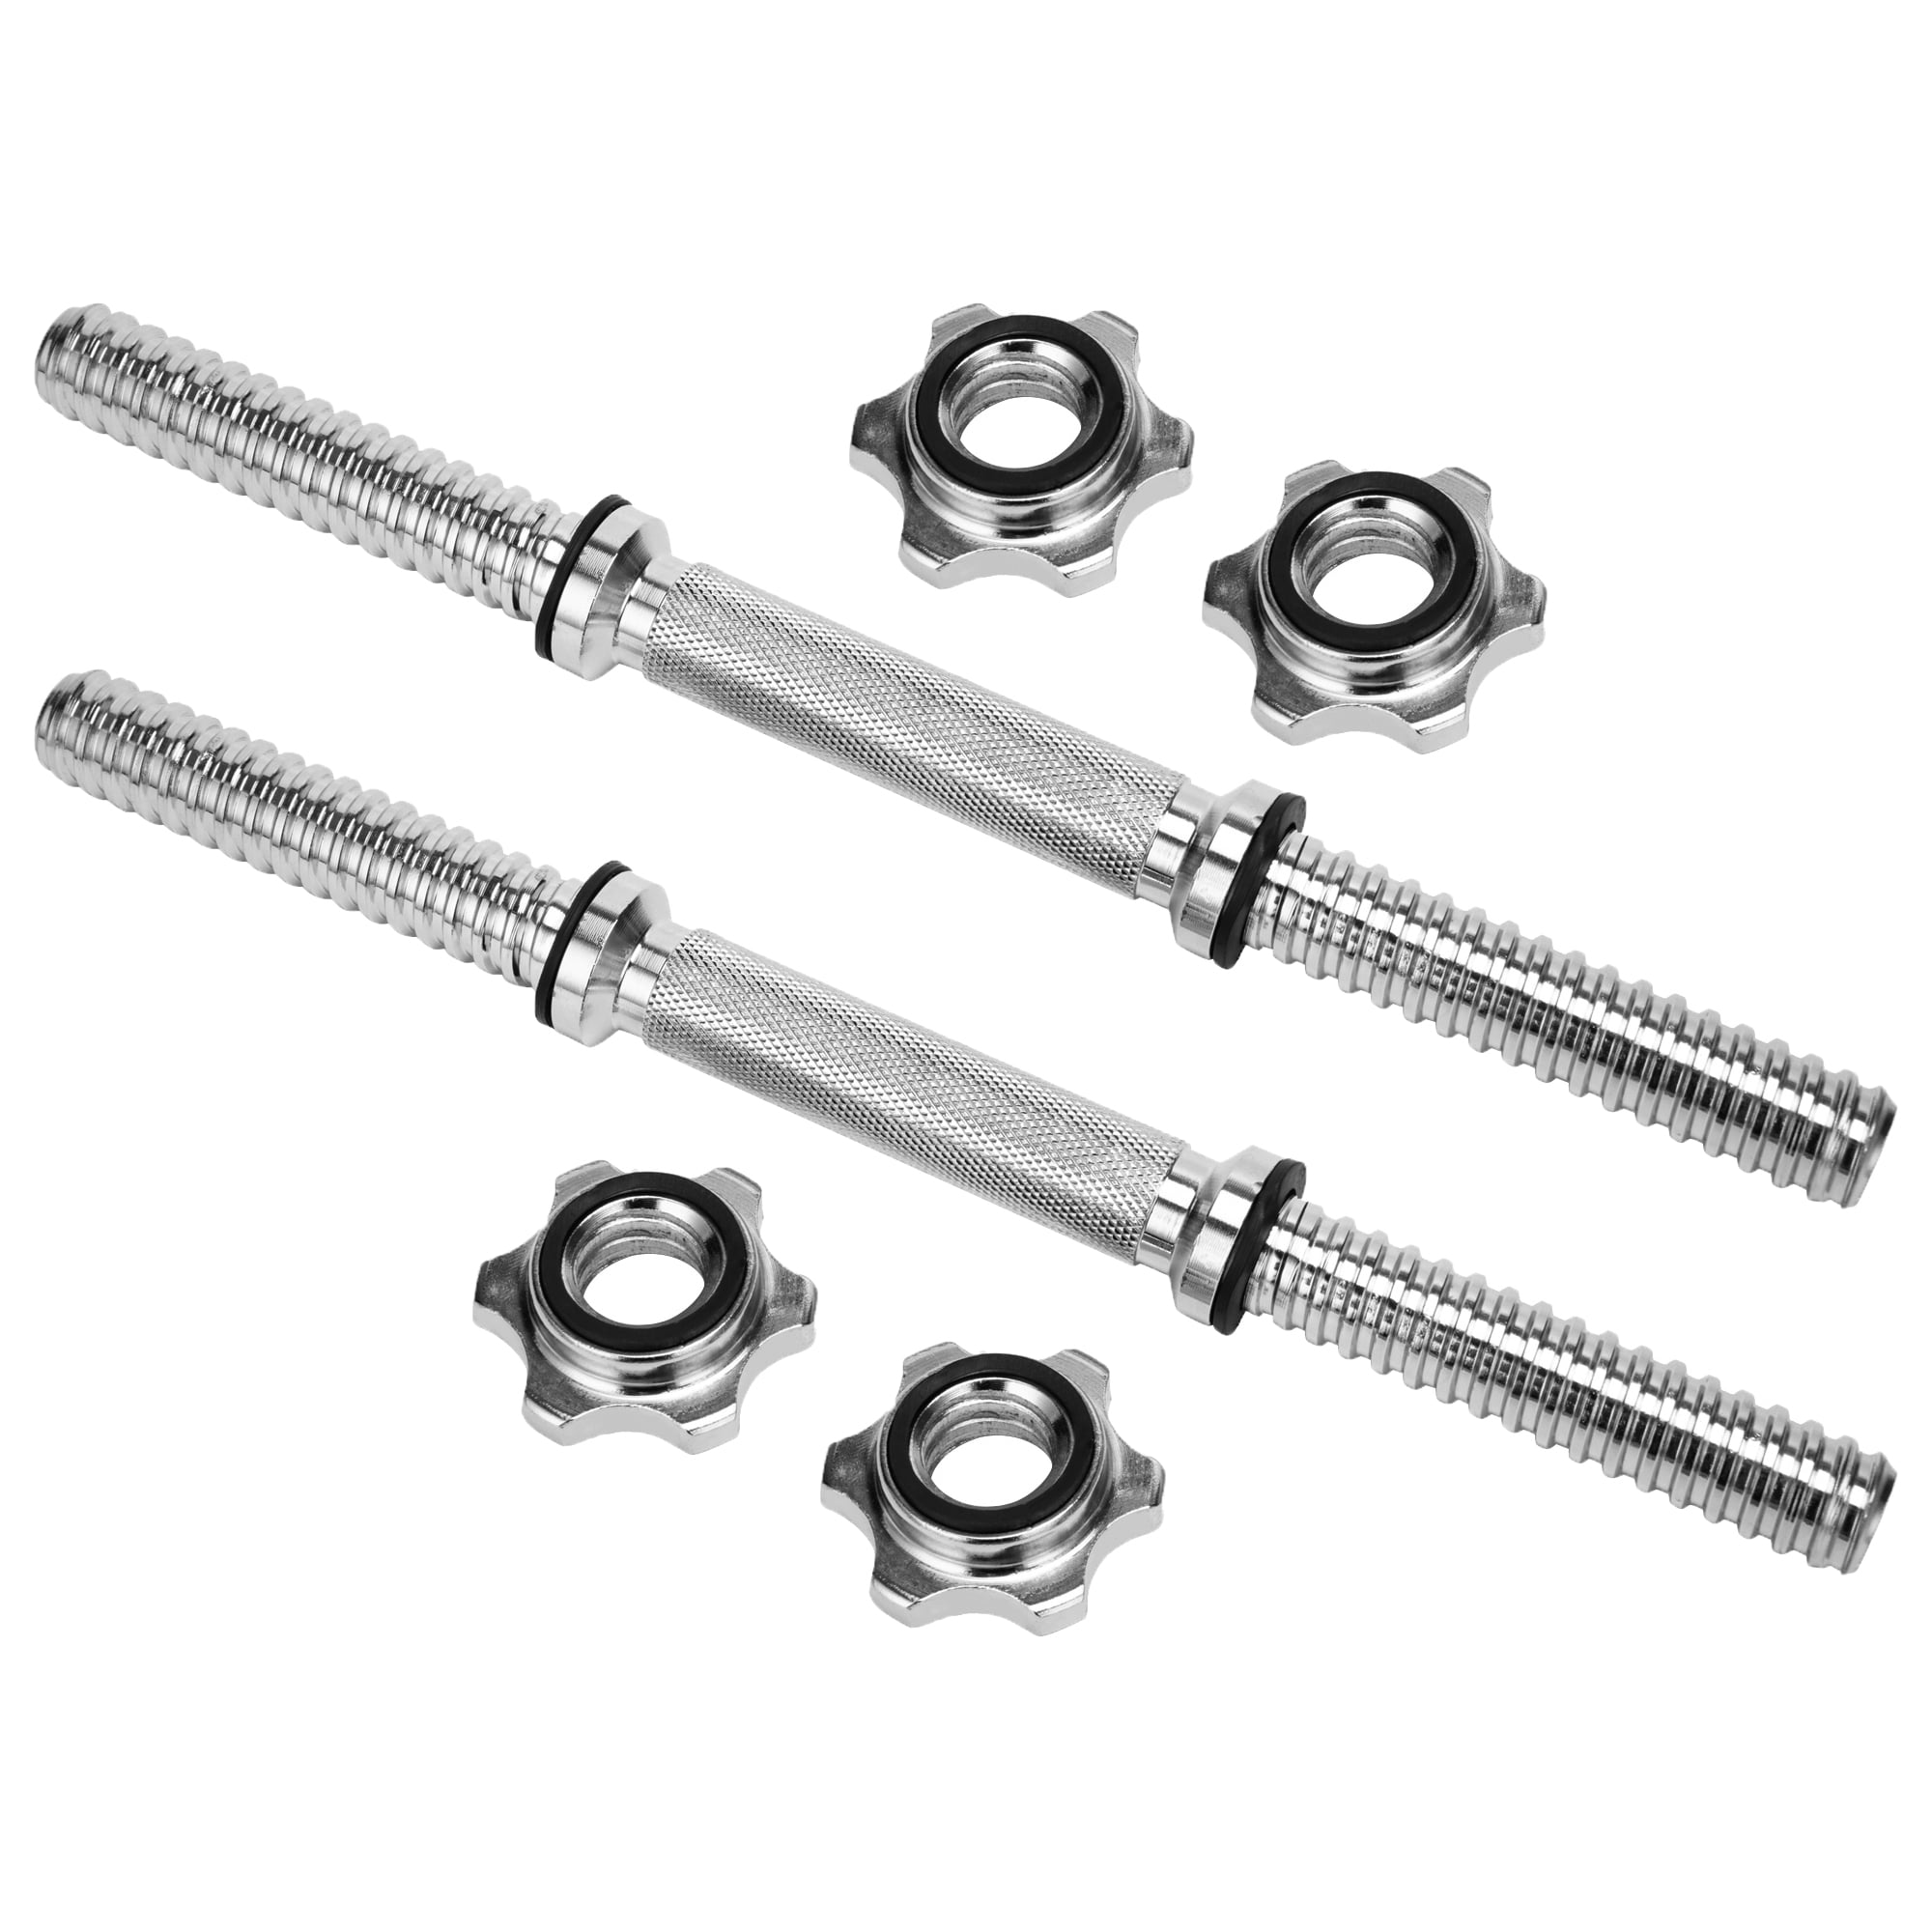 standard weight lifting barbell dumbell bar spin-lock collar clamps x1 BDl PM 